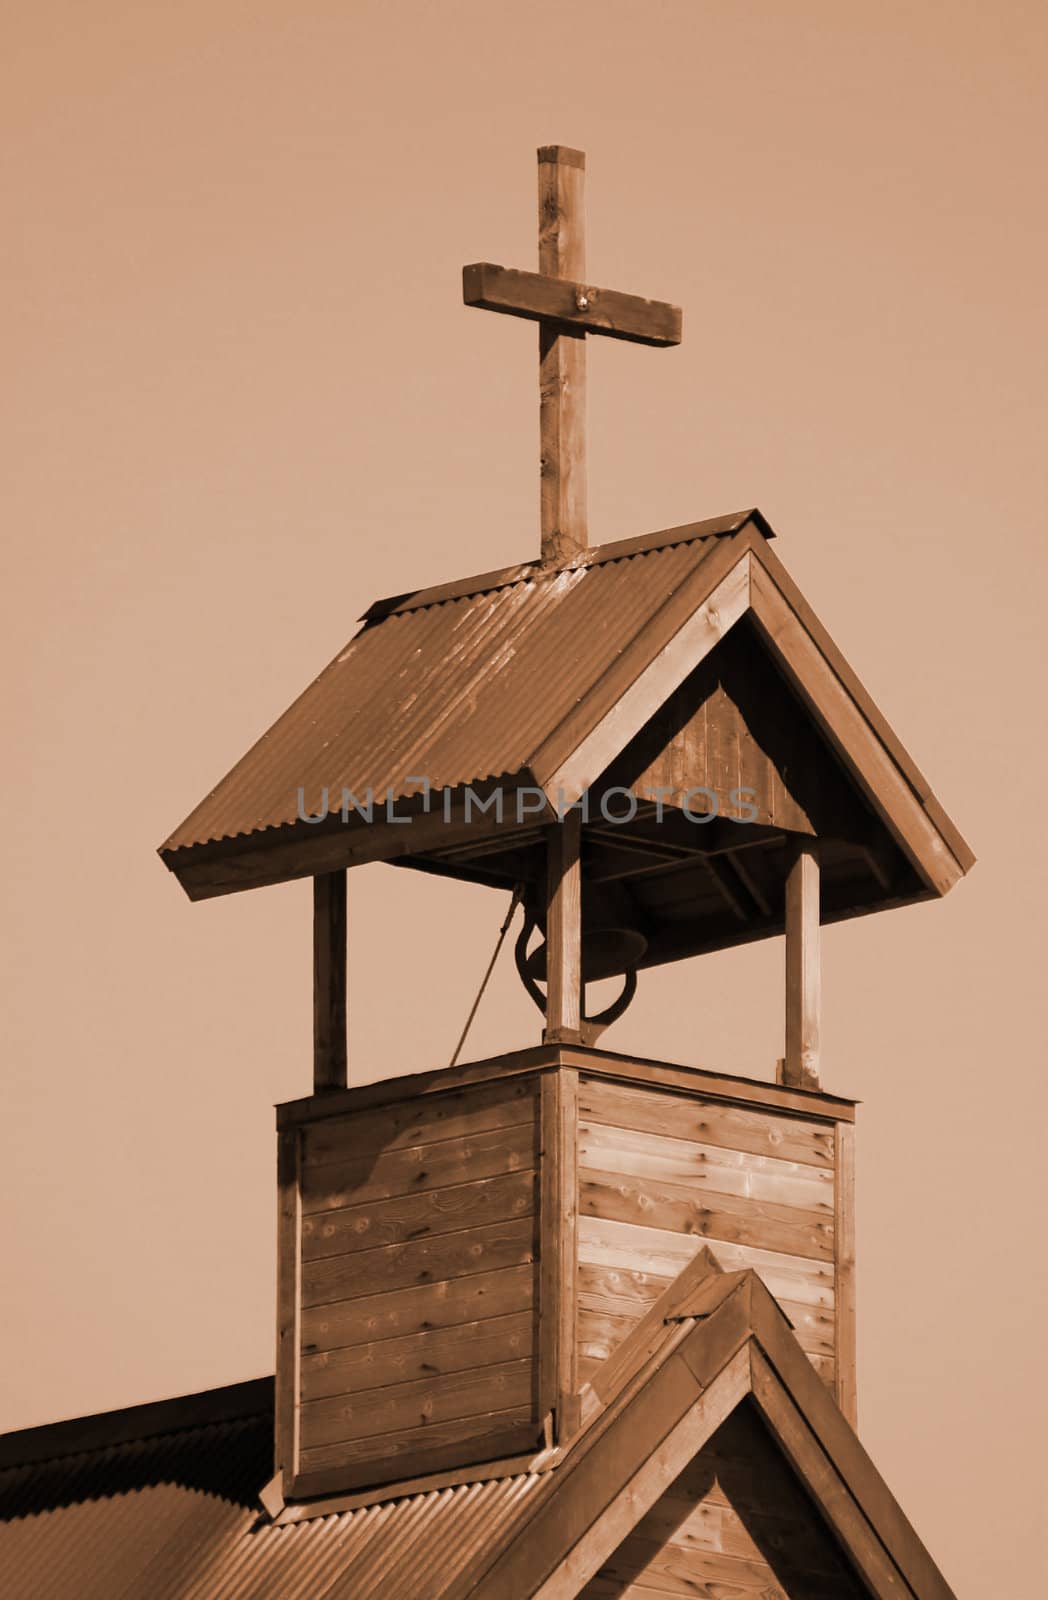 Sepia toned image of old wooden church in New Mexico with hand-hewn cross